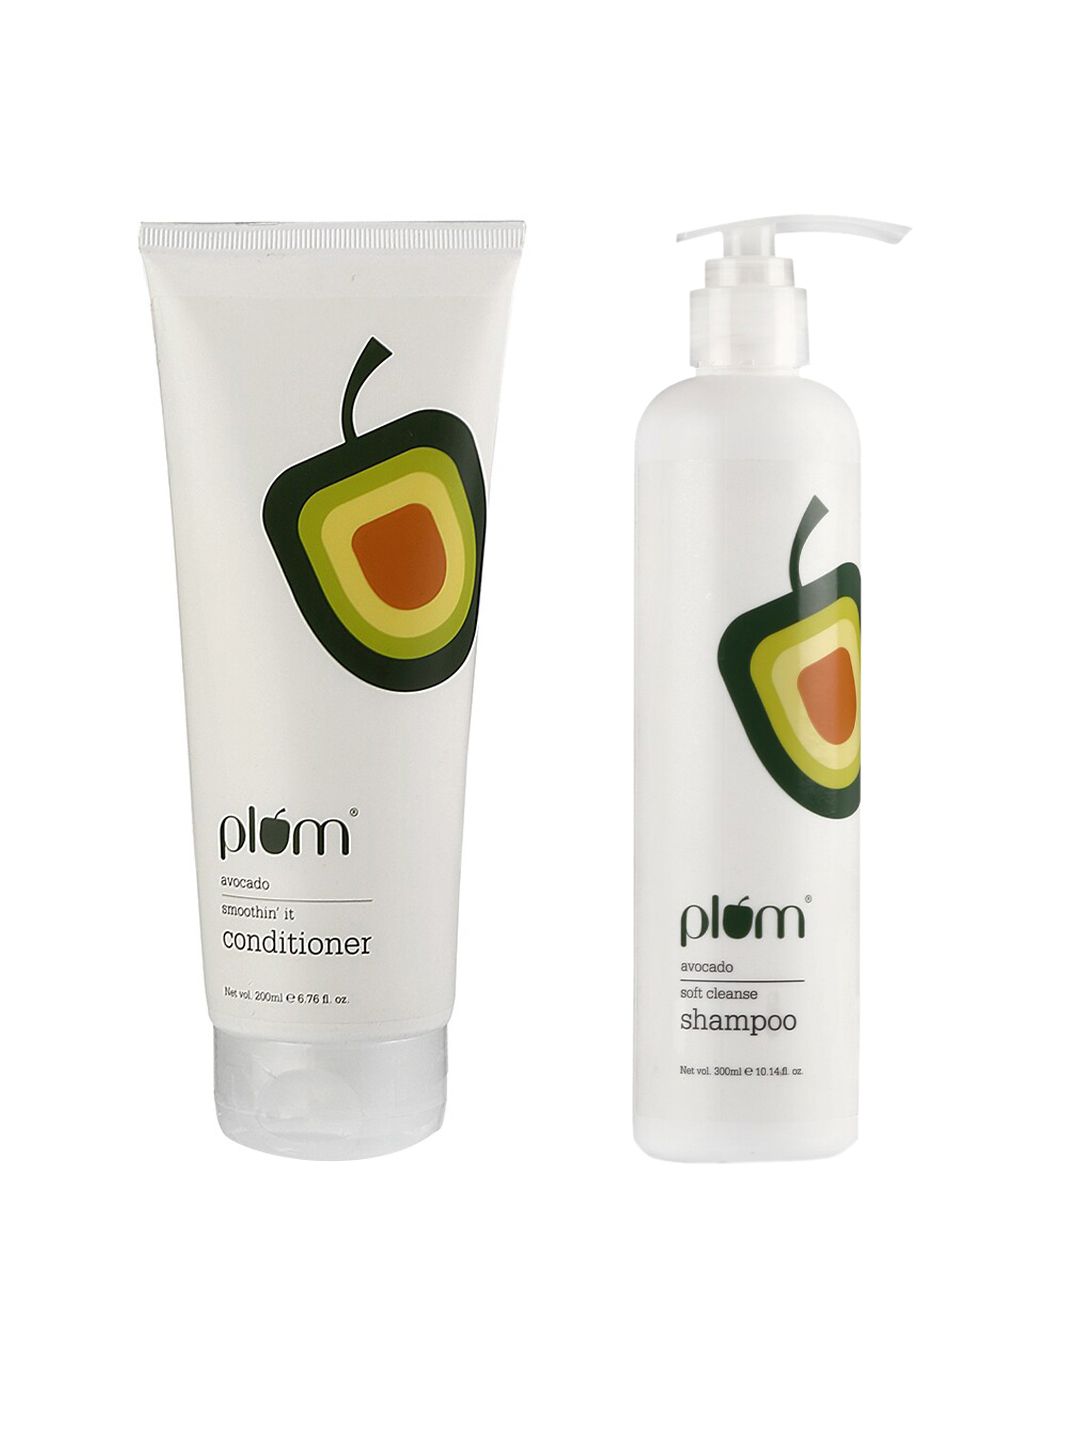 Plum Set of Avocado Soft Cleanse Shampoo & Smoothin It Conditioner Price in India